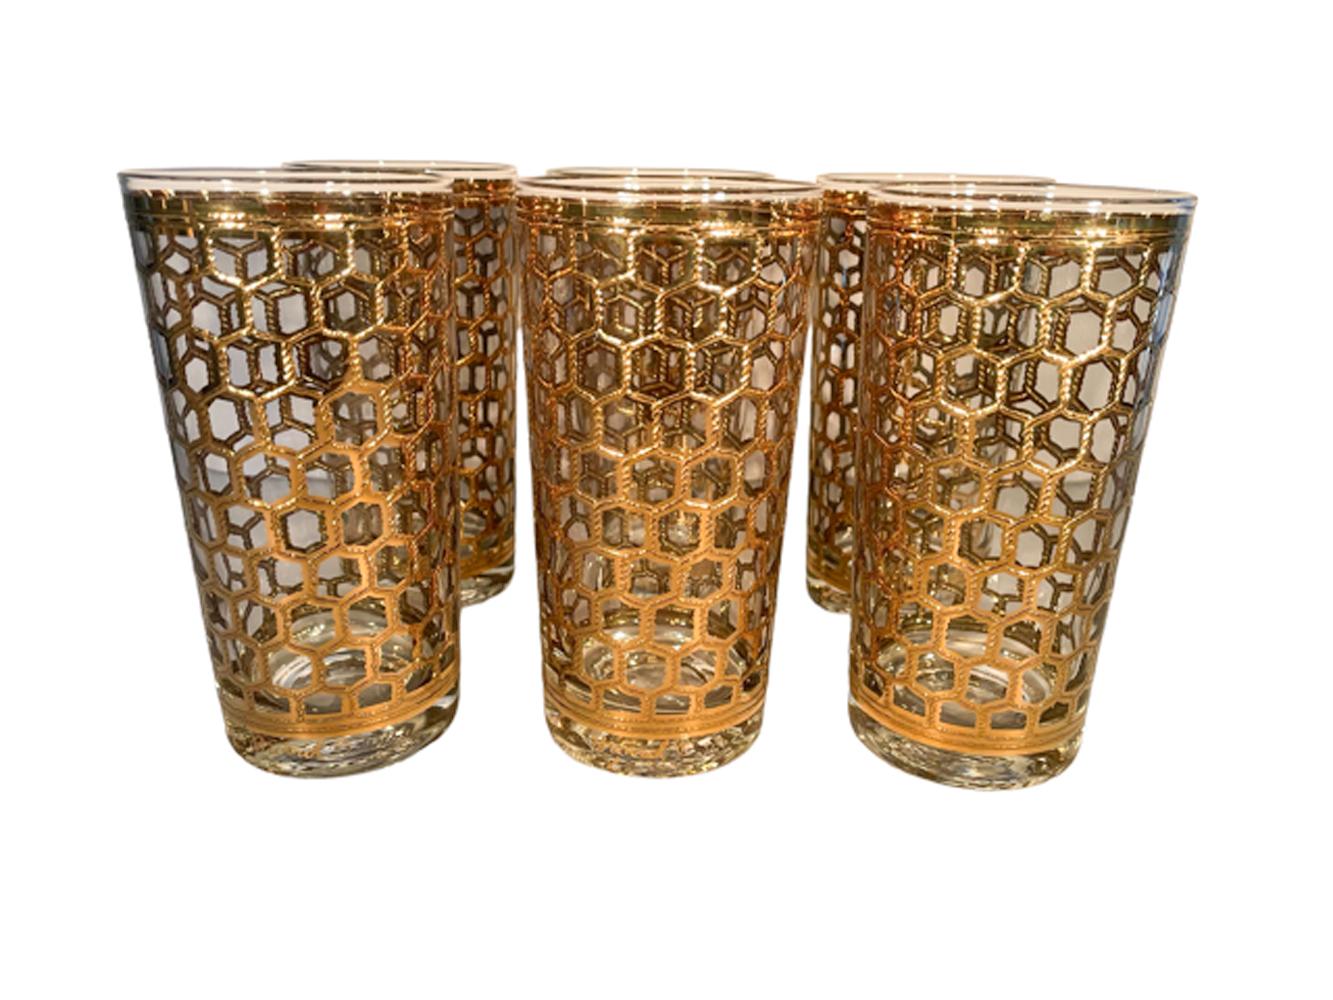 Vintage highball glasses designed by Georges Briard in a pattern called 